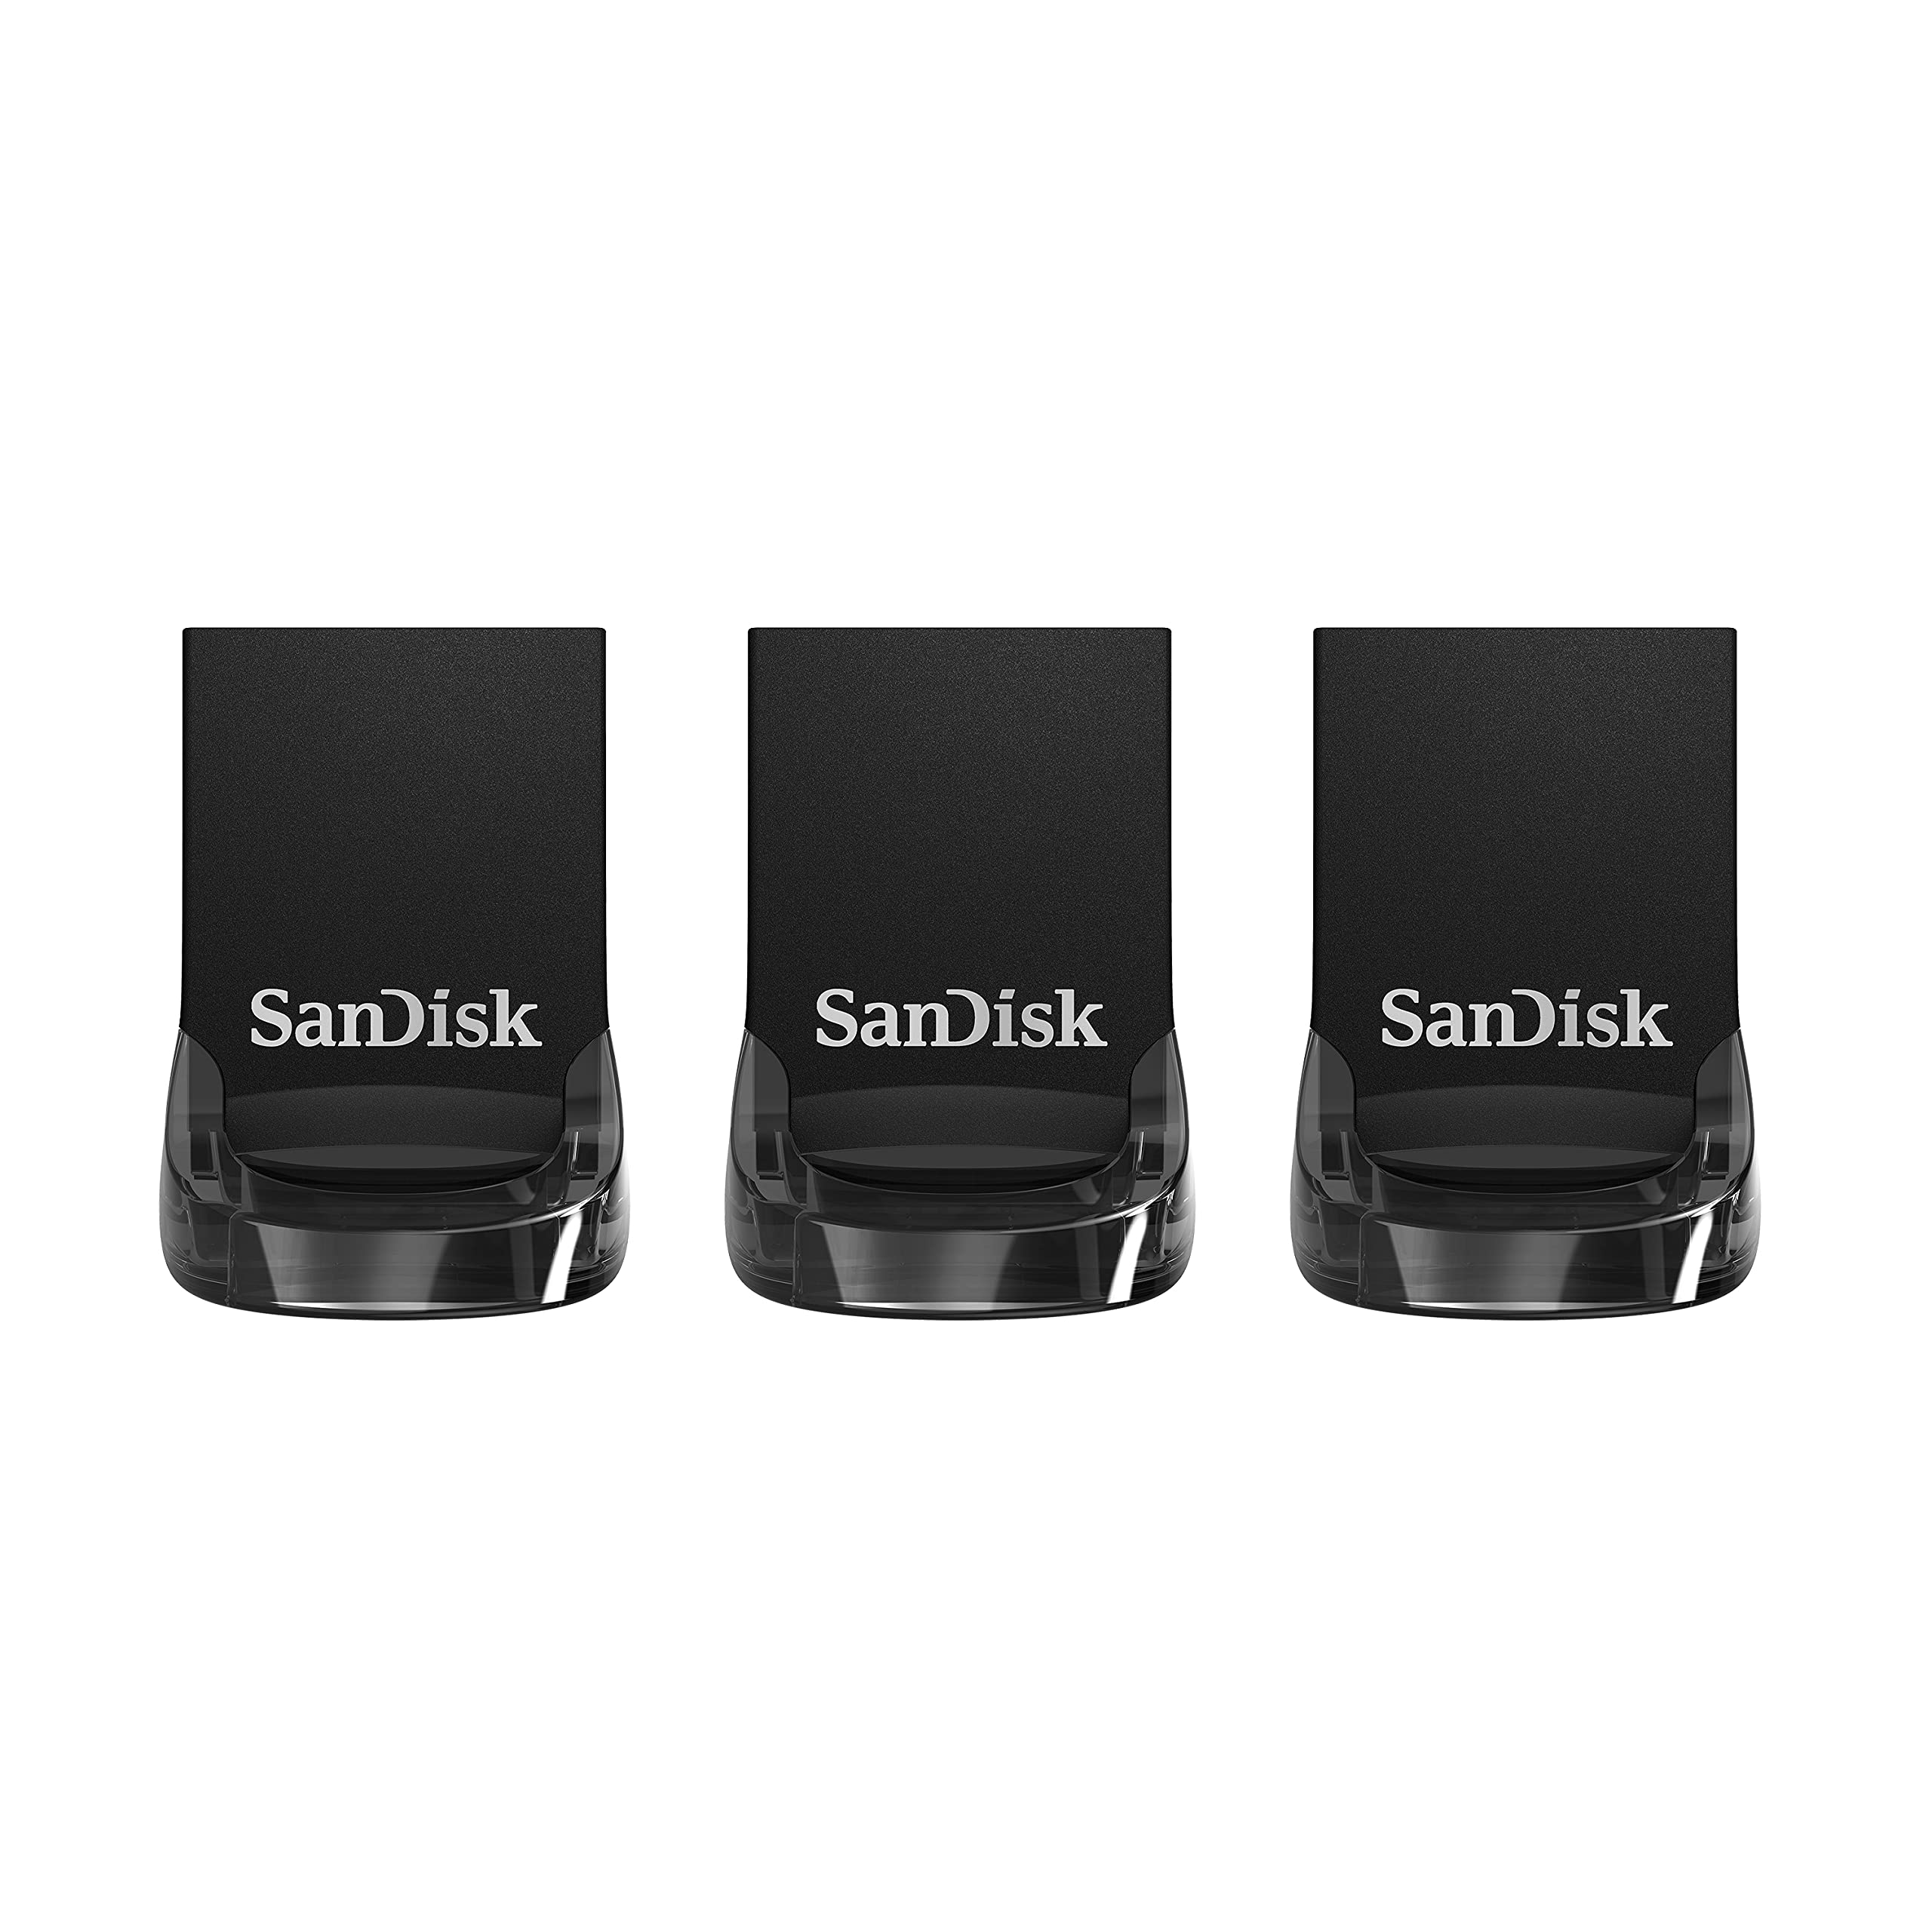 SanDisk Ultra Fit 32GB USB 3.1 Flash Drive up to 130MB/s read - Triple Pack